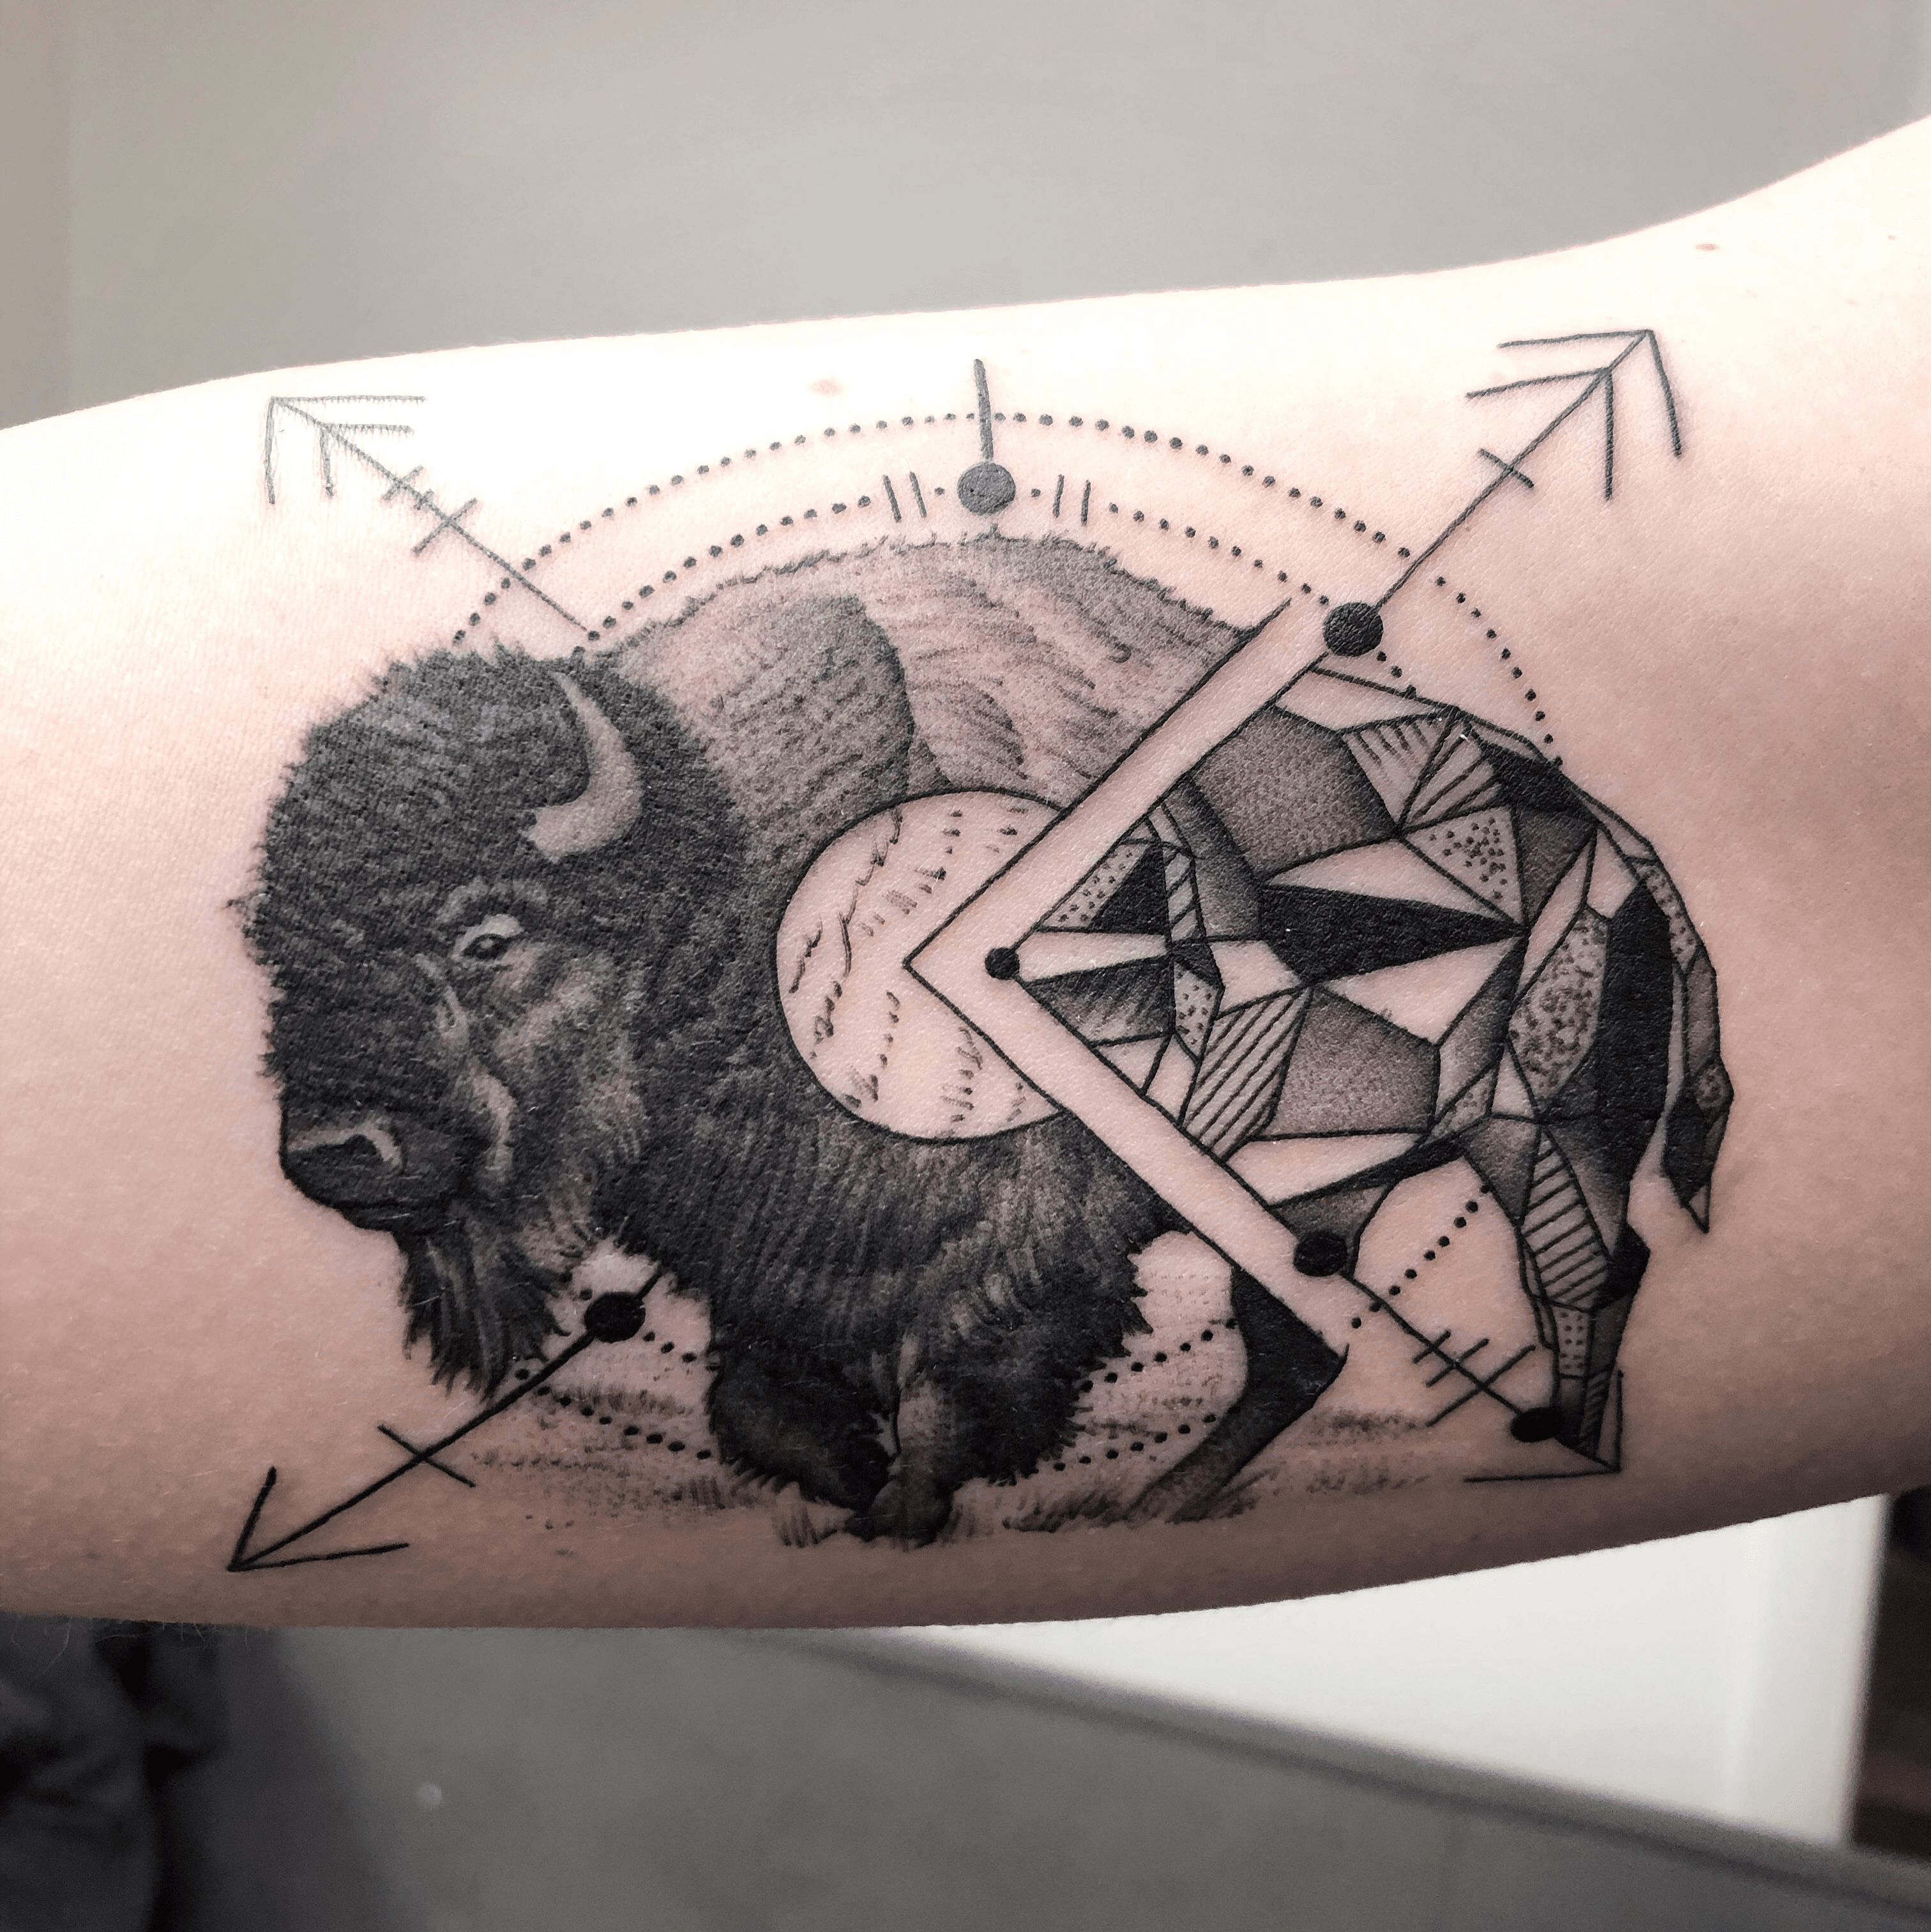 Last Chance Tattoo  Black and gray dot work geometric Lion by Chris  Sandoval For appointments DM inkslingerart818 or call the shop directly  walkinswelcome lastchancetattoo lasvegas lasvegastattooers  lasvegastattooartist lasvegastattooshop 